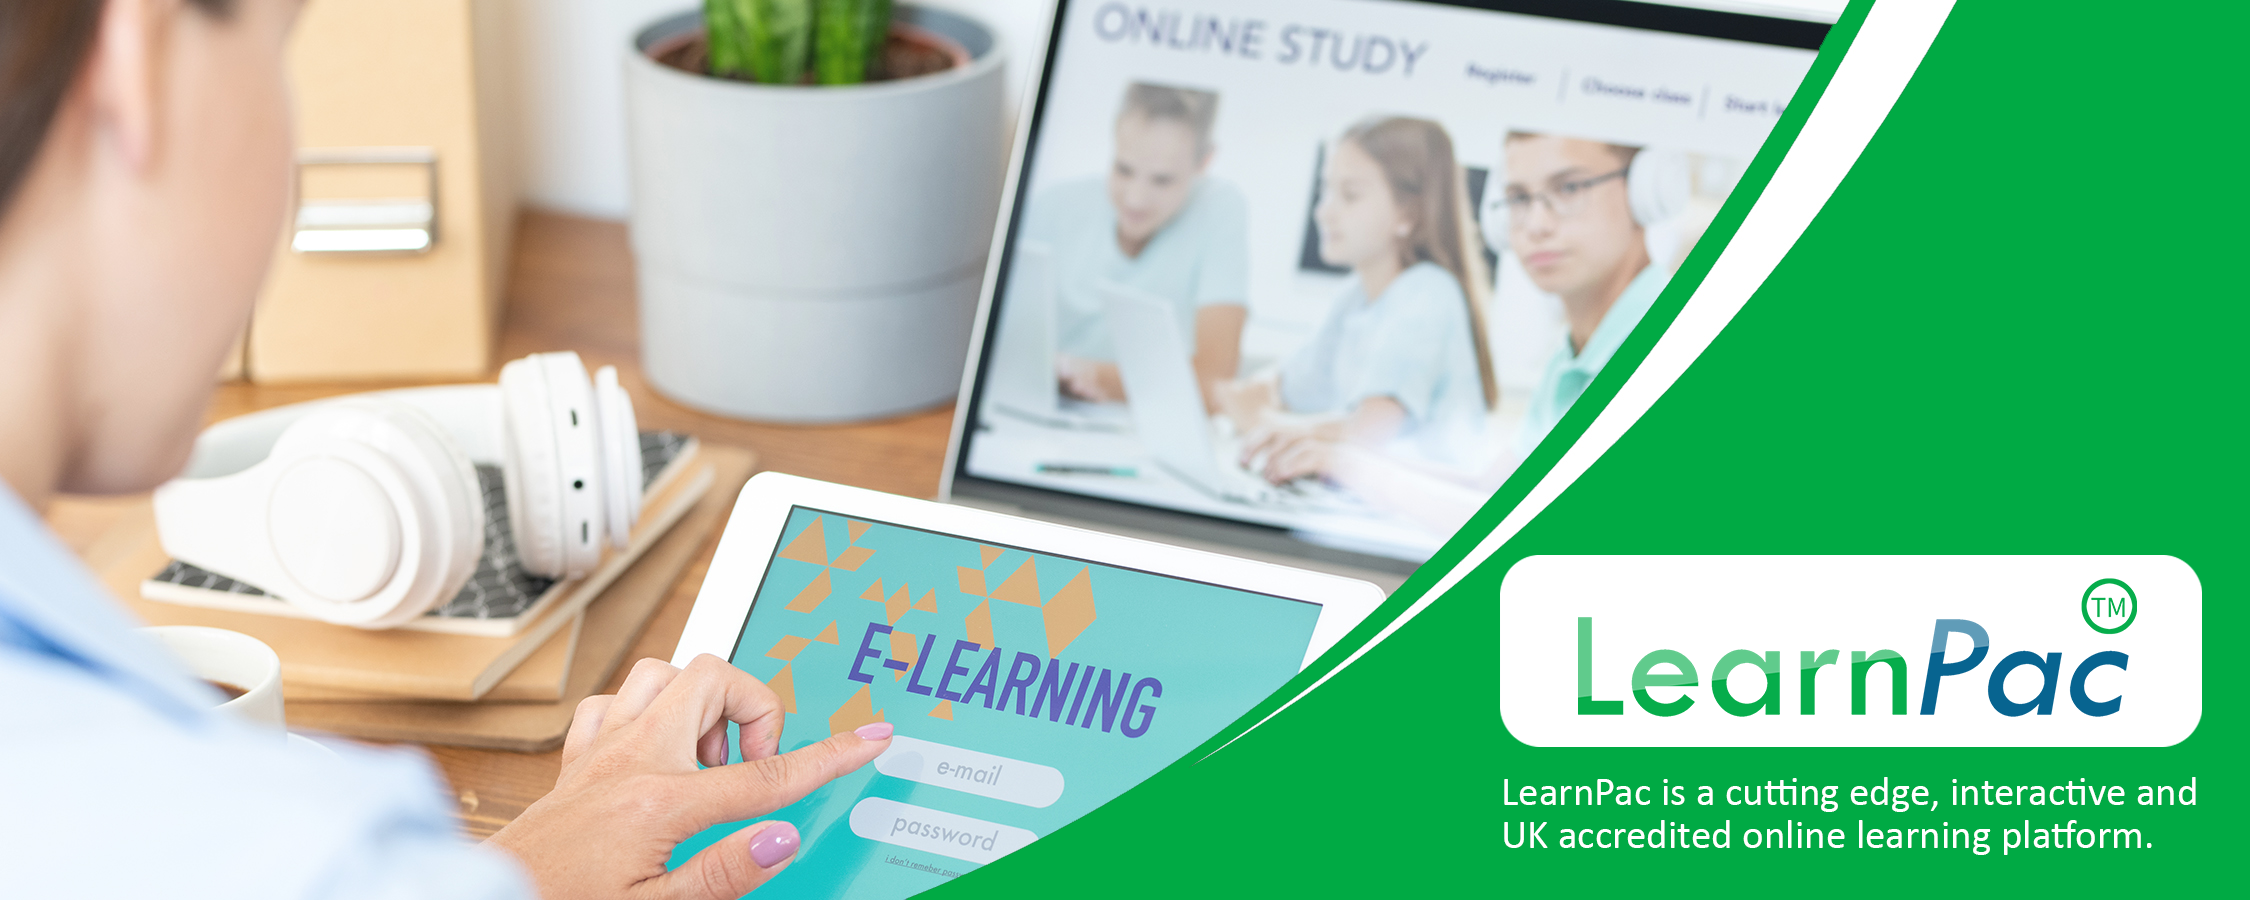 Clinical Governance - Online Learning Courses - E-Learning Courses - LearnPac Systems UK -